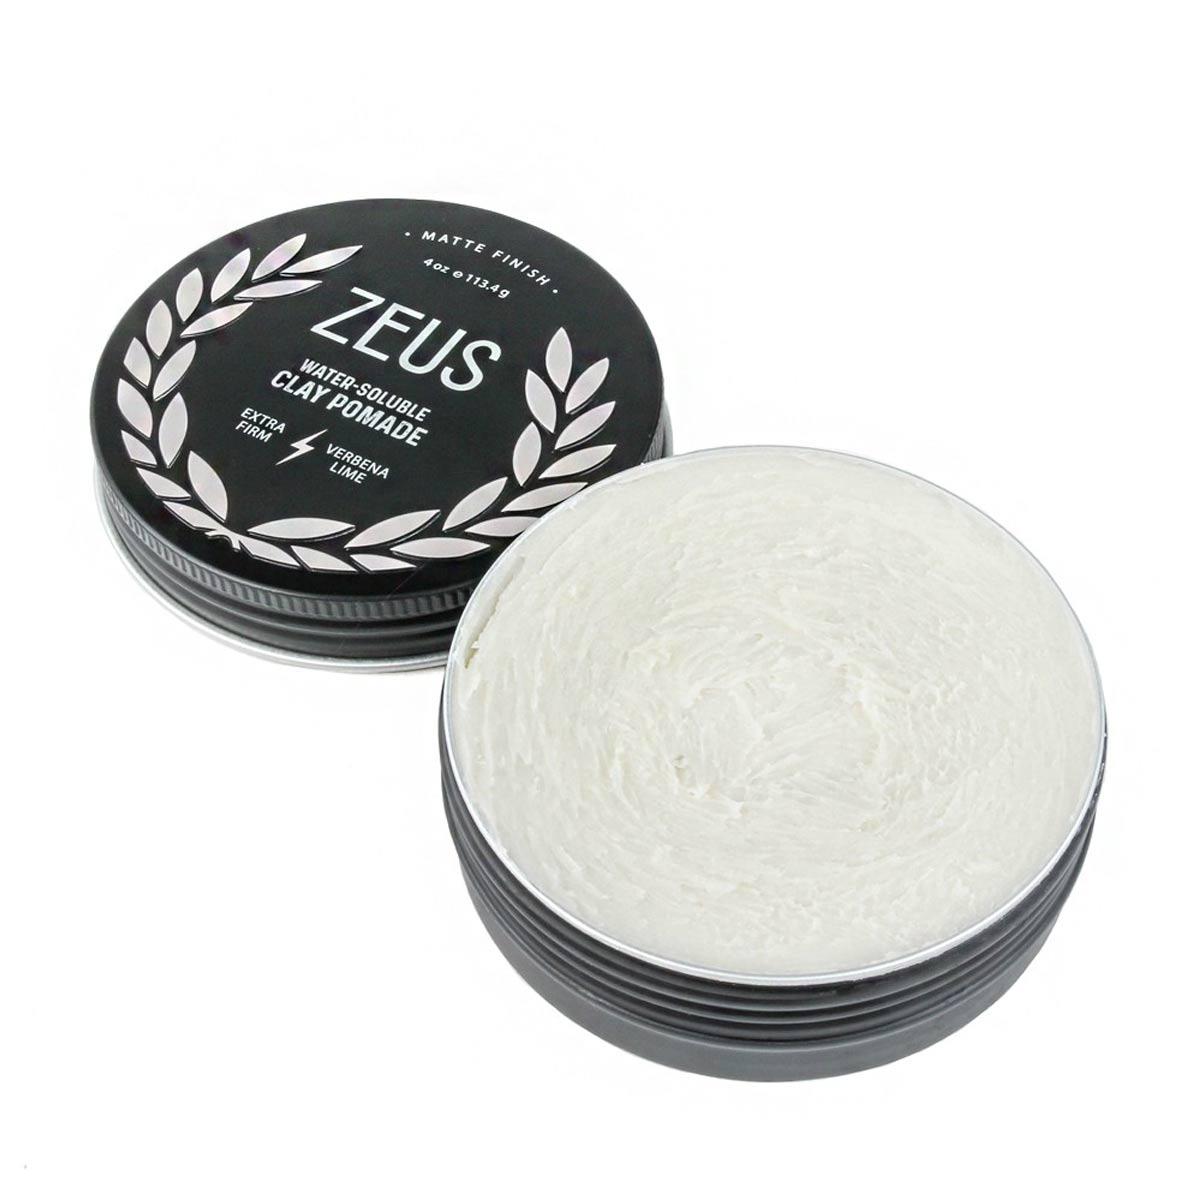 Primary image of Extra Firm Matte Clay Pomade